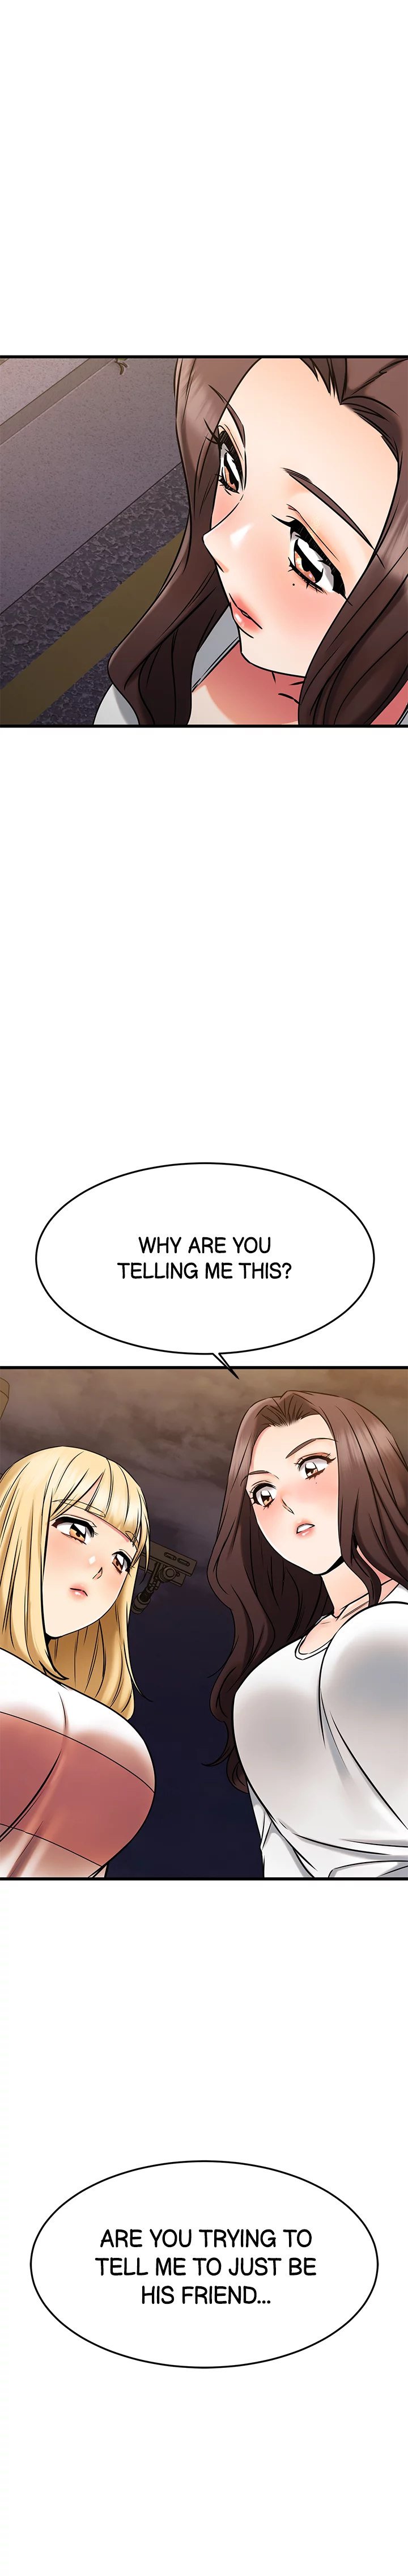 my-female-friend-who-crossed-the-line-chap-46-5